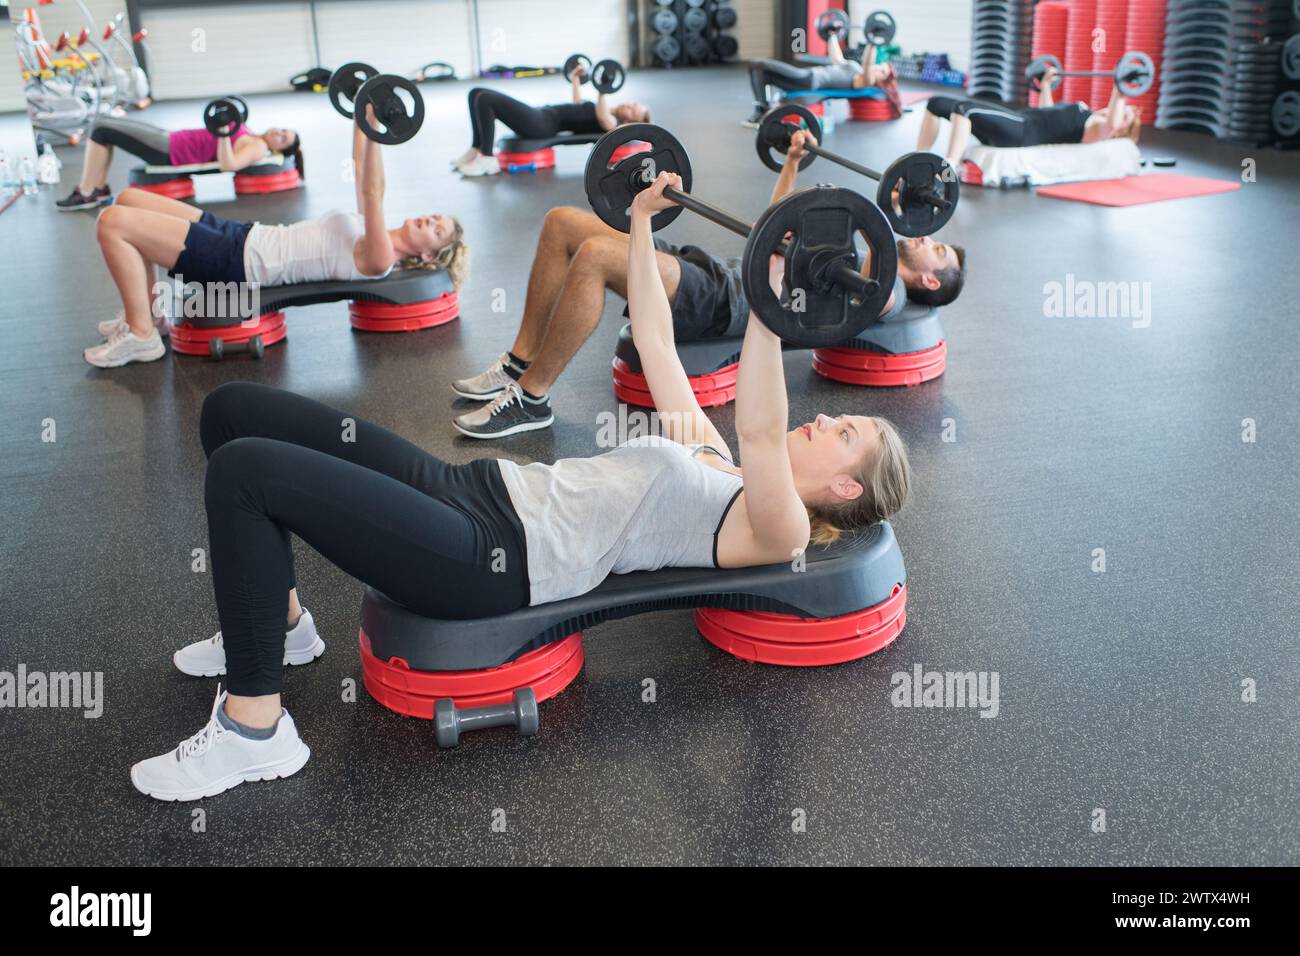 group of people exercising with barbell bars in gym Stock Photo